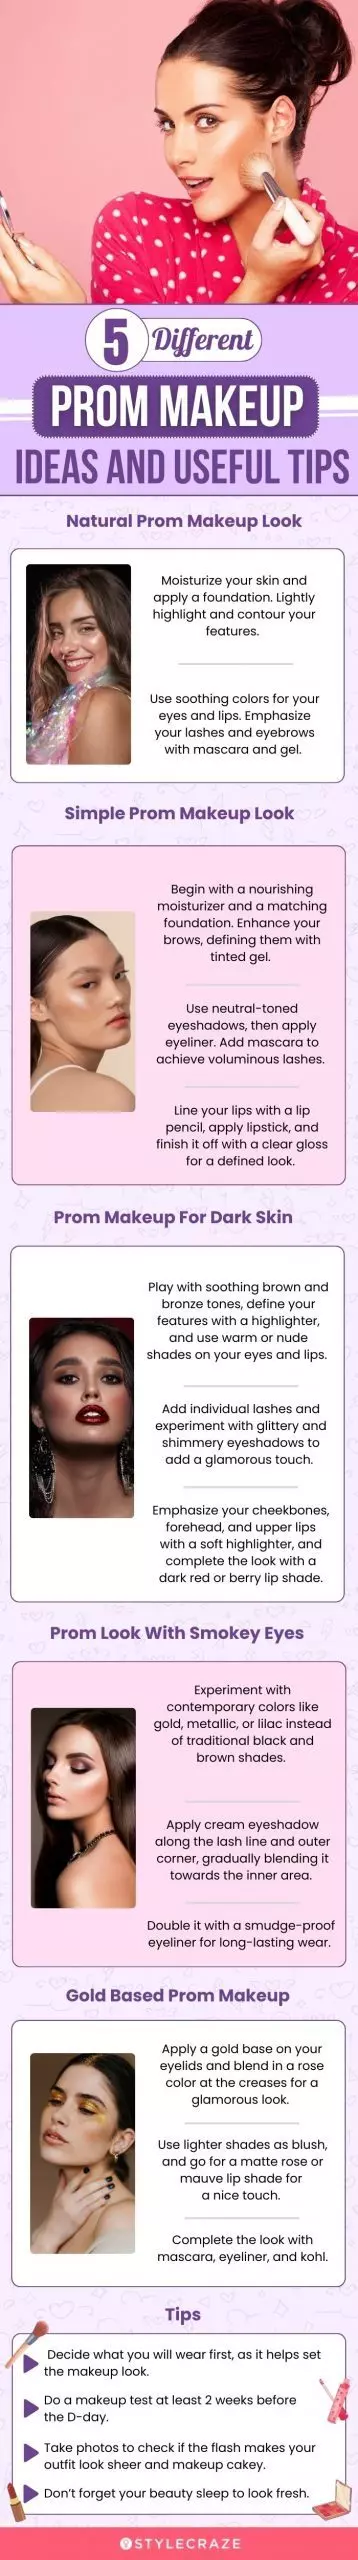 5 different prom makeup ideas and useful tips (infographic)